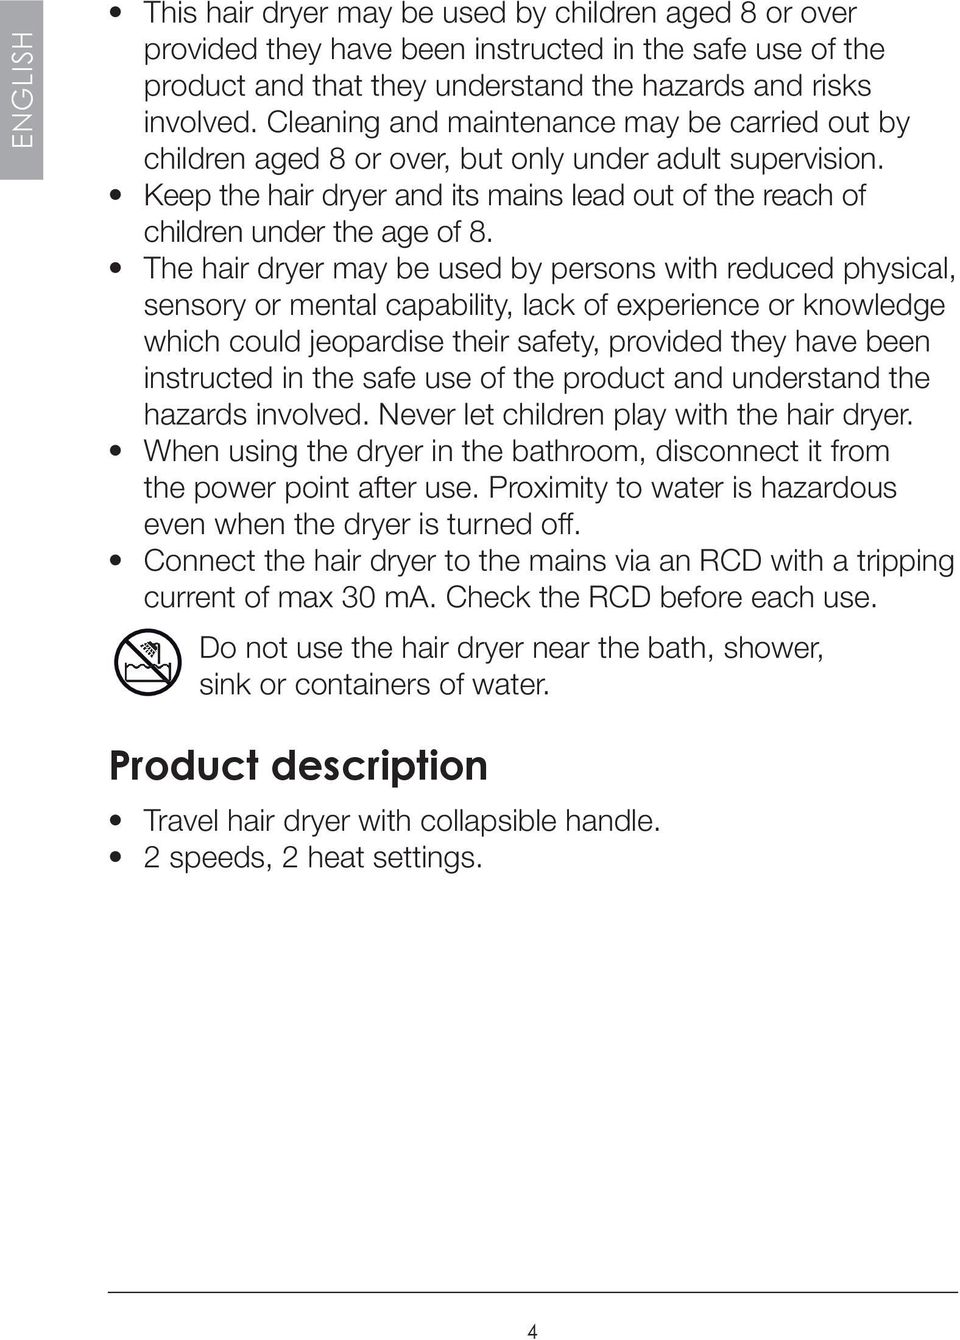 The hair dryer may be used by persons with reduced physical, sensory or mental capability, lack of experience or knowledge which could jeopardise their safety, provided they have been instructed in